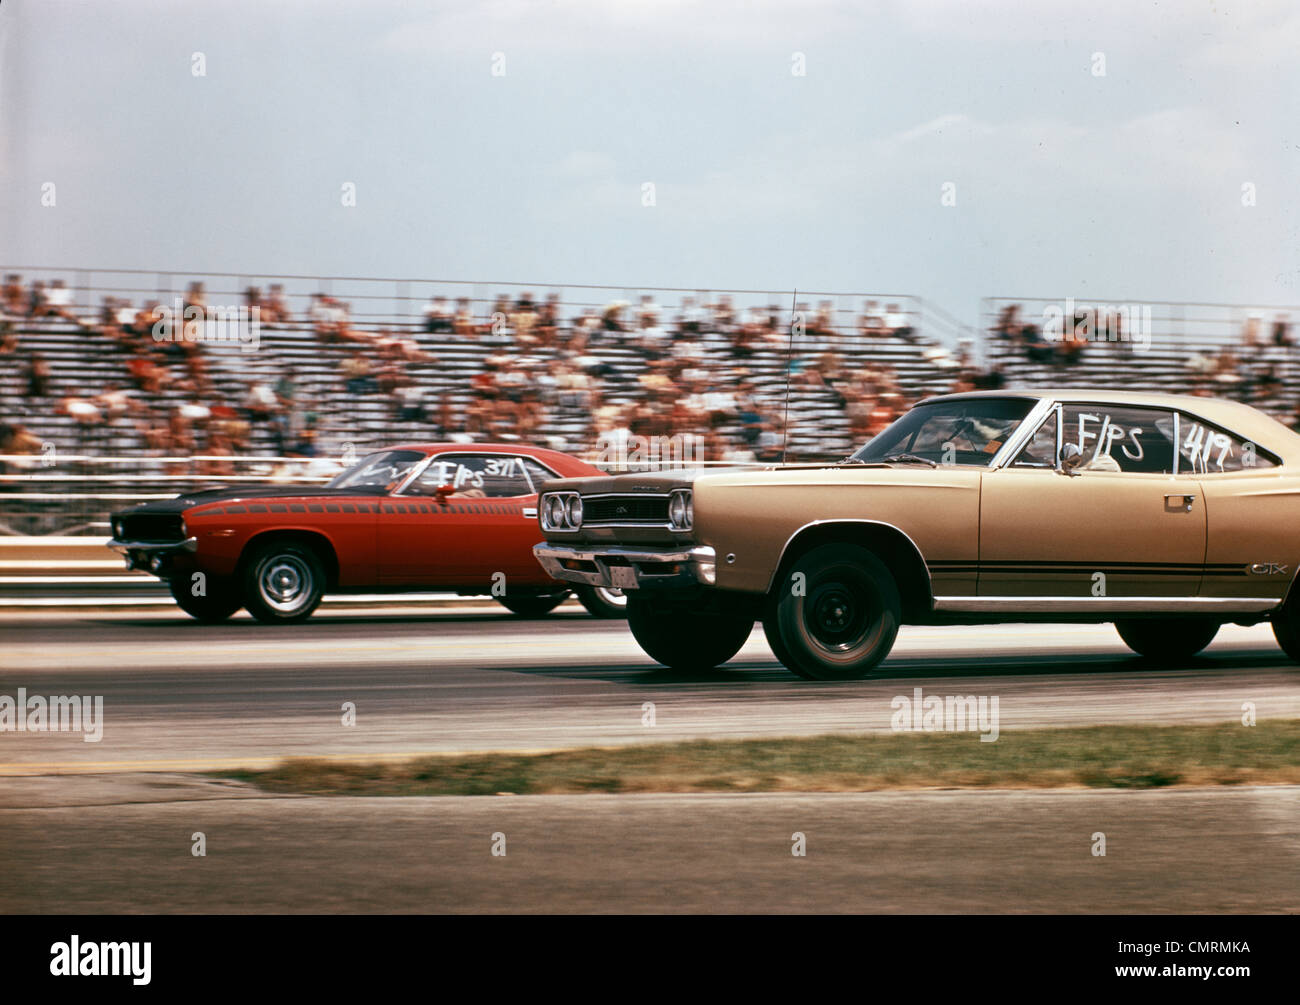 1970 1970s 2 CARS DRAG RACING GRANDSTAND RACE SPEED COMPETITION AUTOMOTIVE BROWNSVILLE INDIANA RACEWAY RETRO Stock Photo